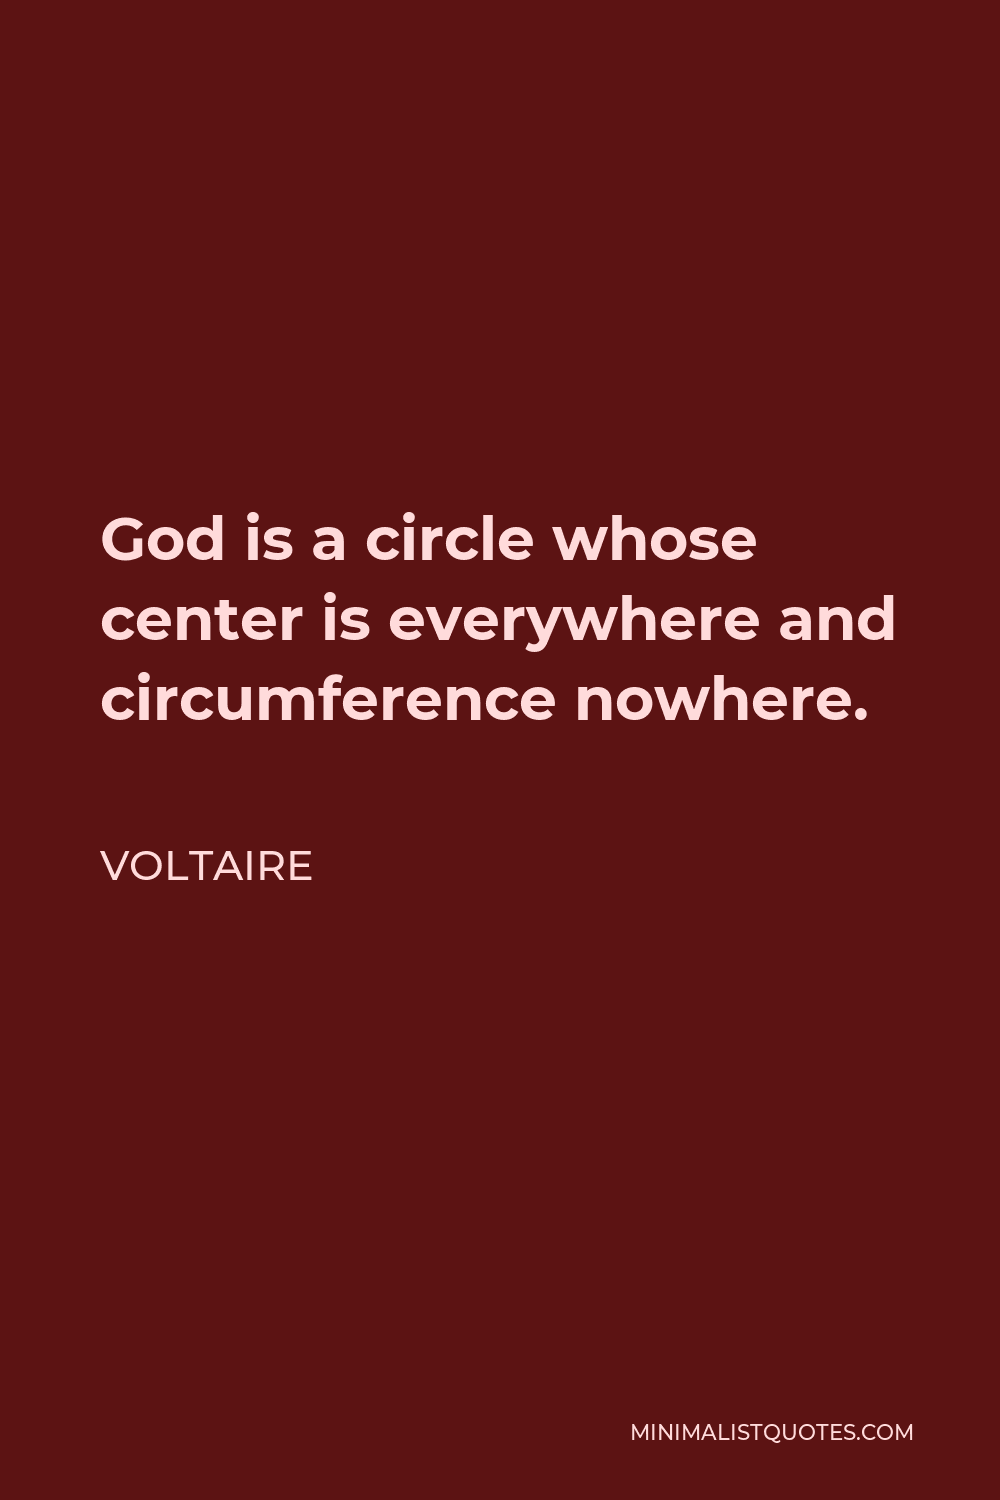 Voltaire Quote - God is a circle whose center is everywhere and circumference nowhere.